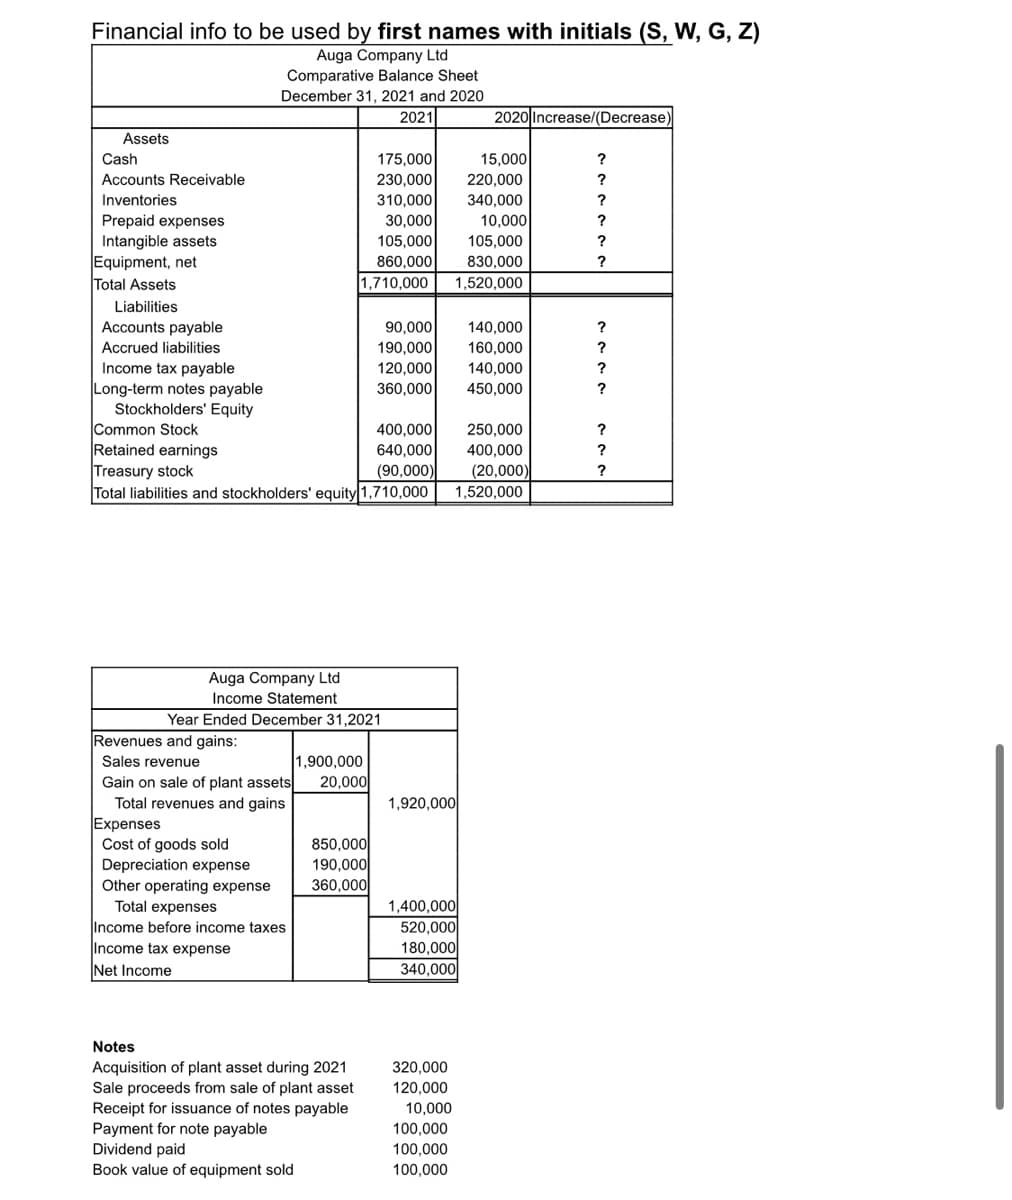 Financial info to be used by first names with initials (S, W, G, Z)
Auga Company Ltd
Comparative Balance Sheet
December 31, 2021 and 2020
2021
2020 Increase/(Decrease)
Assets
Cash
175,000
15,000
?
Accounts Receivable
230,000
220,000
?
Inventories
310,000
340,000
?
Prepaid expenses
Intangible assets
Equipment, net
Total Assets
30,000
10,000
?
105,000
105,000
860,000
1,710,000
830,000
?
1,520,000
Liabilities
Accounts payable
90,000
140,000
?
160,000
140,000
450,000
Accrued liabilities
190,000
?
Income tax payable
Long-term notes payable
Stockholders' Equity
Common Stock
Retained earnings
Treasury stock
Total liabilities and stockholders' equity 1,710,000
120,000
?
360,000
?
400,000
640,000
(90,000)
250,000
?
400,000
?
(20,000)
?
1,520,000
Auga Company Ltd
Income Statement
Year Ended December 31,2021
Revenues and gains:
1,900,000
20,000
Sales revenue
Gain on sale of plant assets
Total revenues and gains
Expenses
Cost of goods sold
Depreciation expense
Other operating expense
1,920,000
850,000
190,000
360,000
Total expenses
Income before income taxes
Income tax expense
1,400,000
520,000
180,000
340,000
Net Income
Notes
Acquisition of plant asset during 2021
Sale proceeds from sale of plant asset
Receipt for issuance of notes payable
Payment for note payable
Dividend paid
Book value of equipment sold
320,000
120,000
10,000
100,000
100,000
100,000
